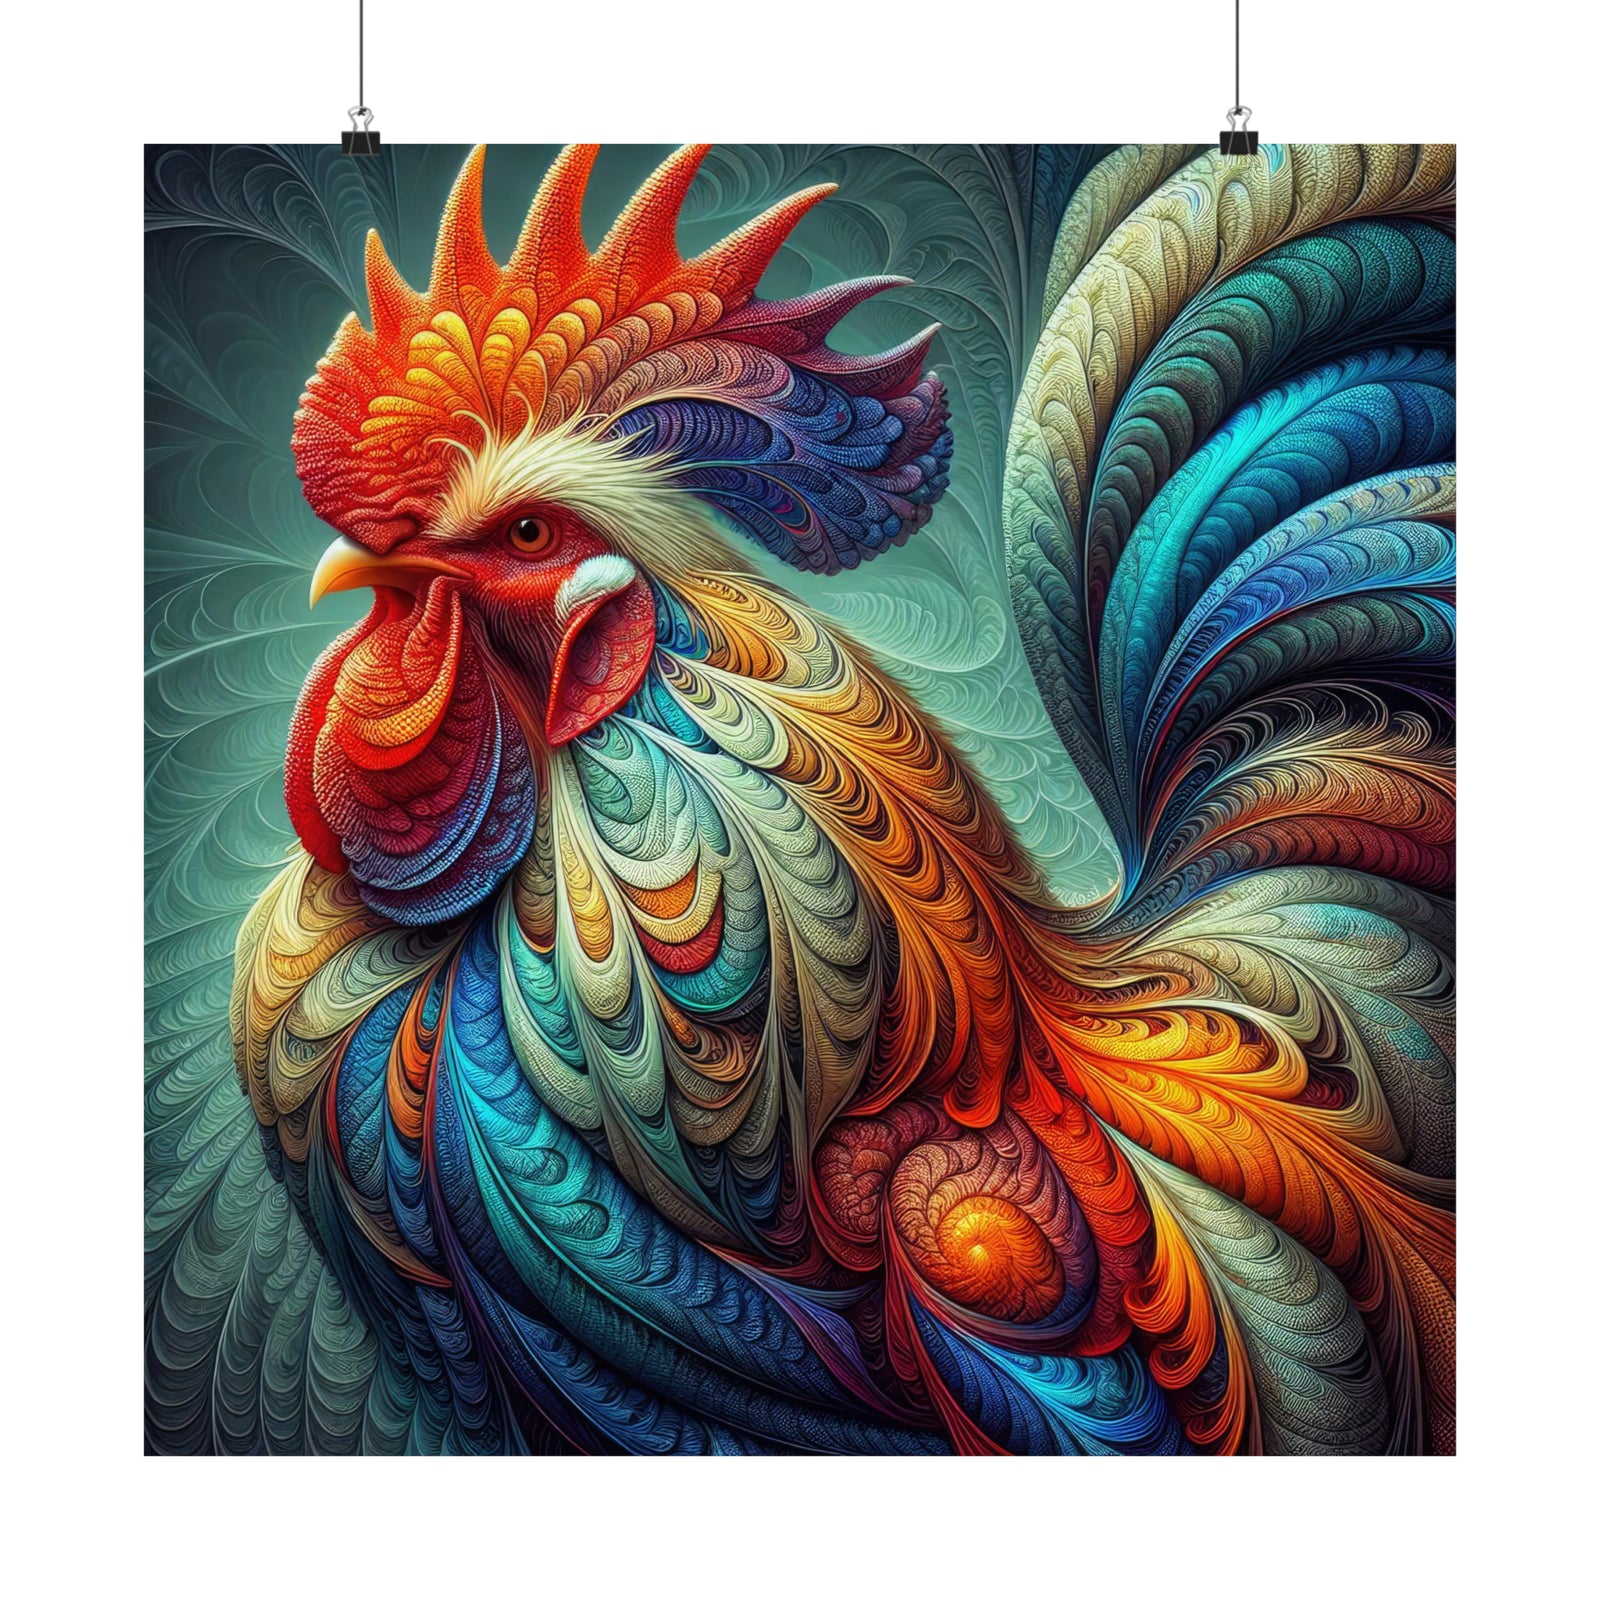 The Regal Acanthus Rooster Poster